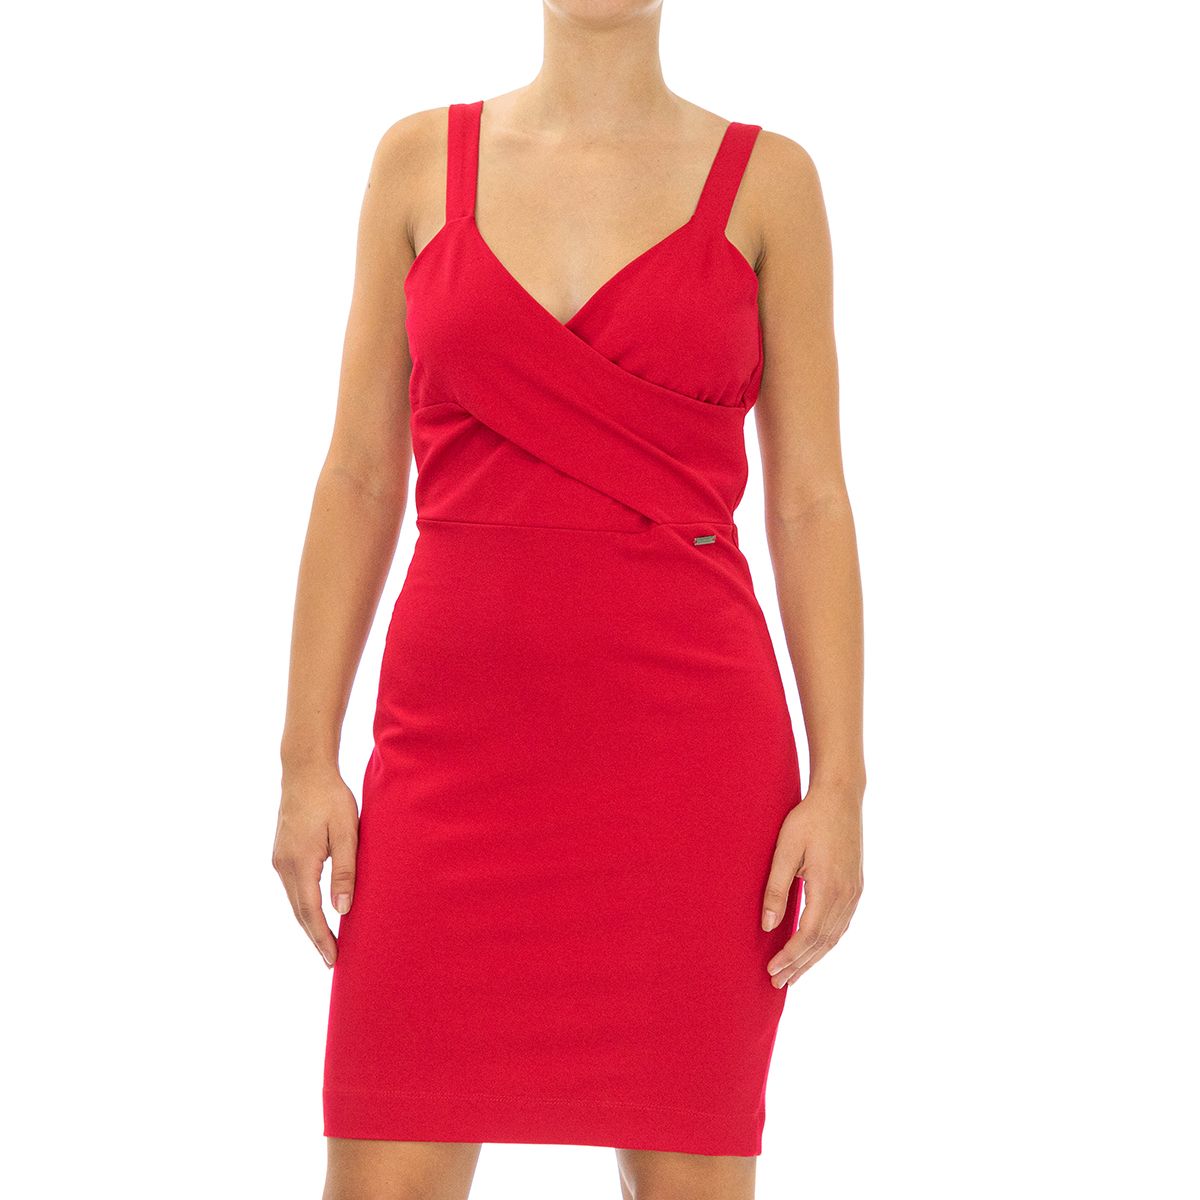 Armani Exchange 6ZYA71YJK9Z-1445-M Fall in love with this red dress, which hugs and flatters the figure.